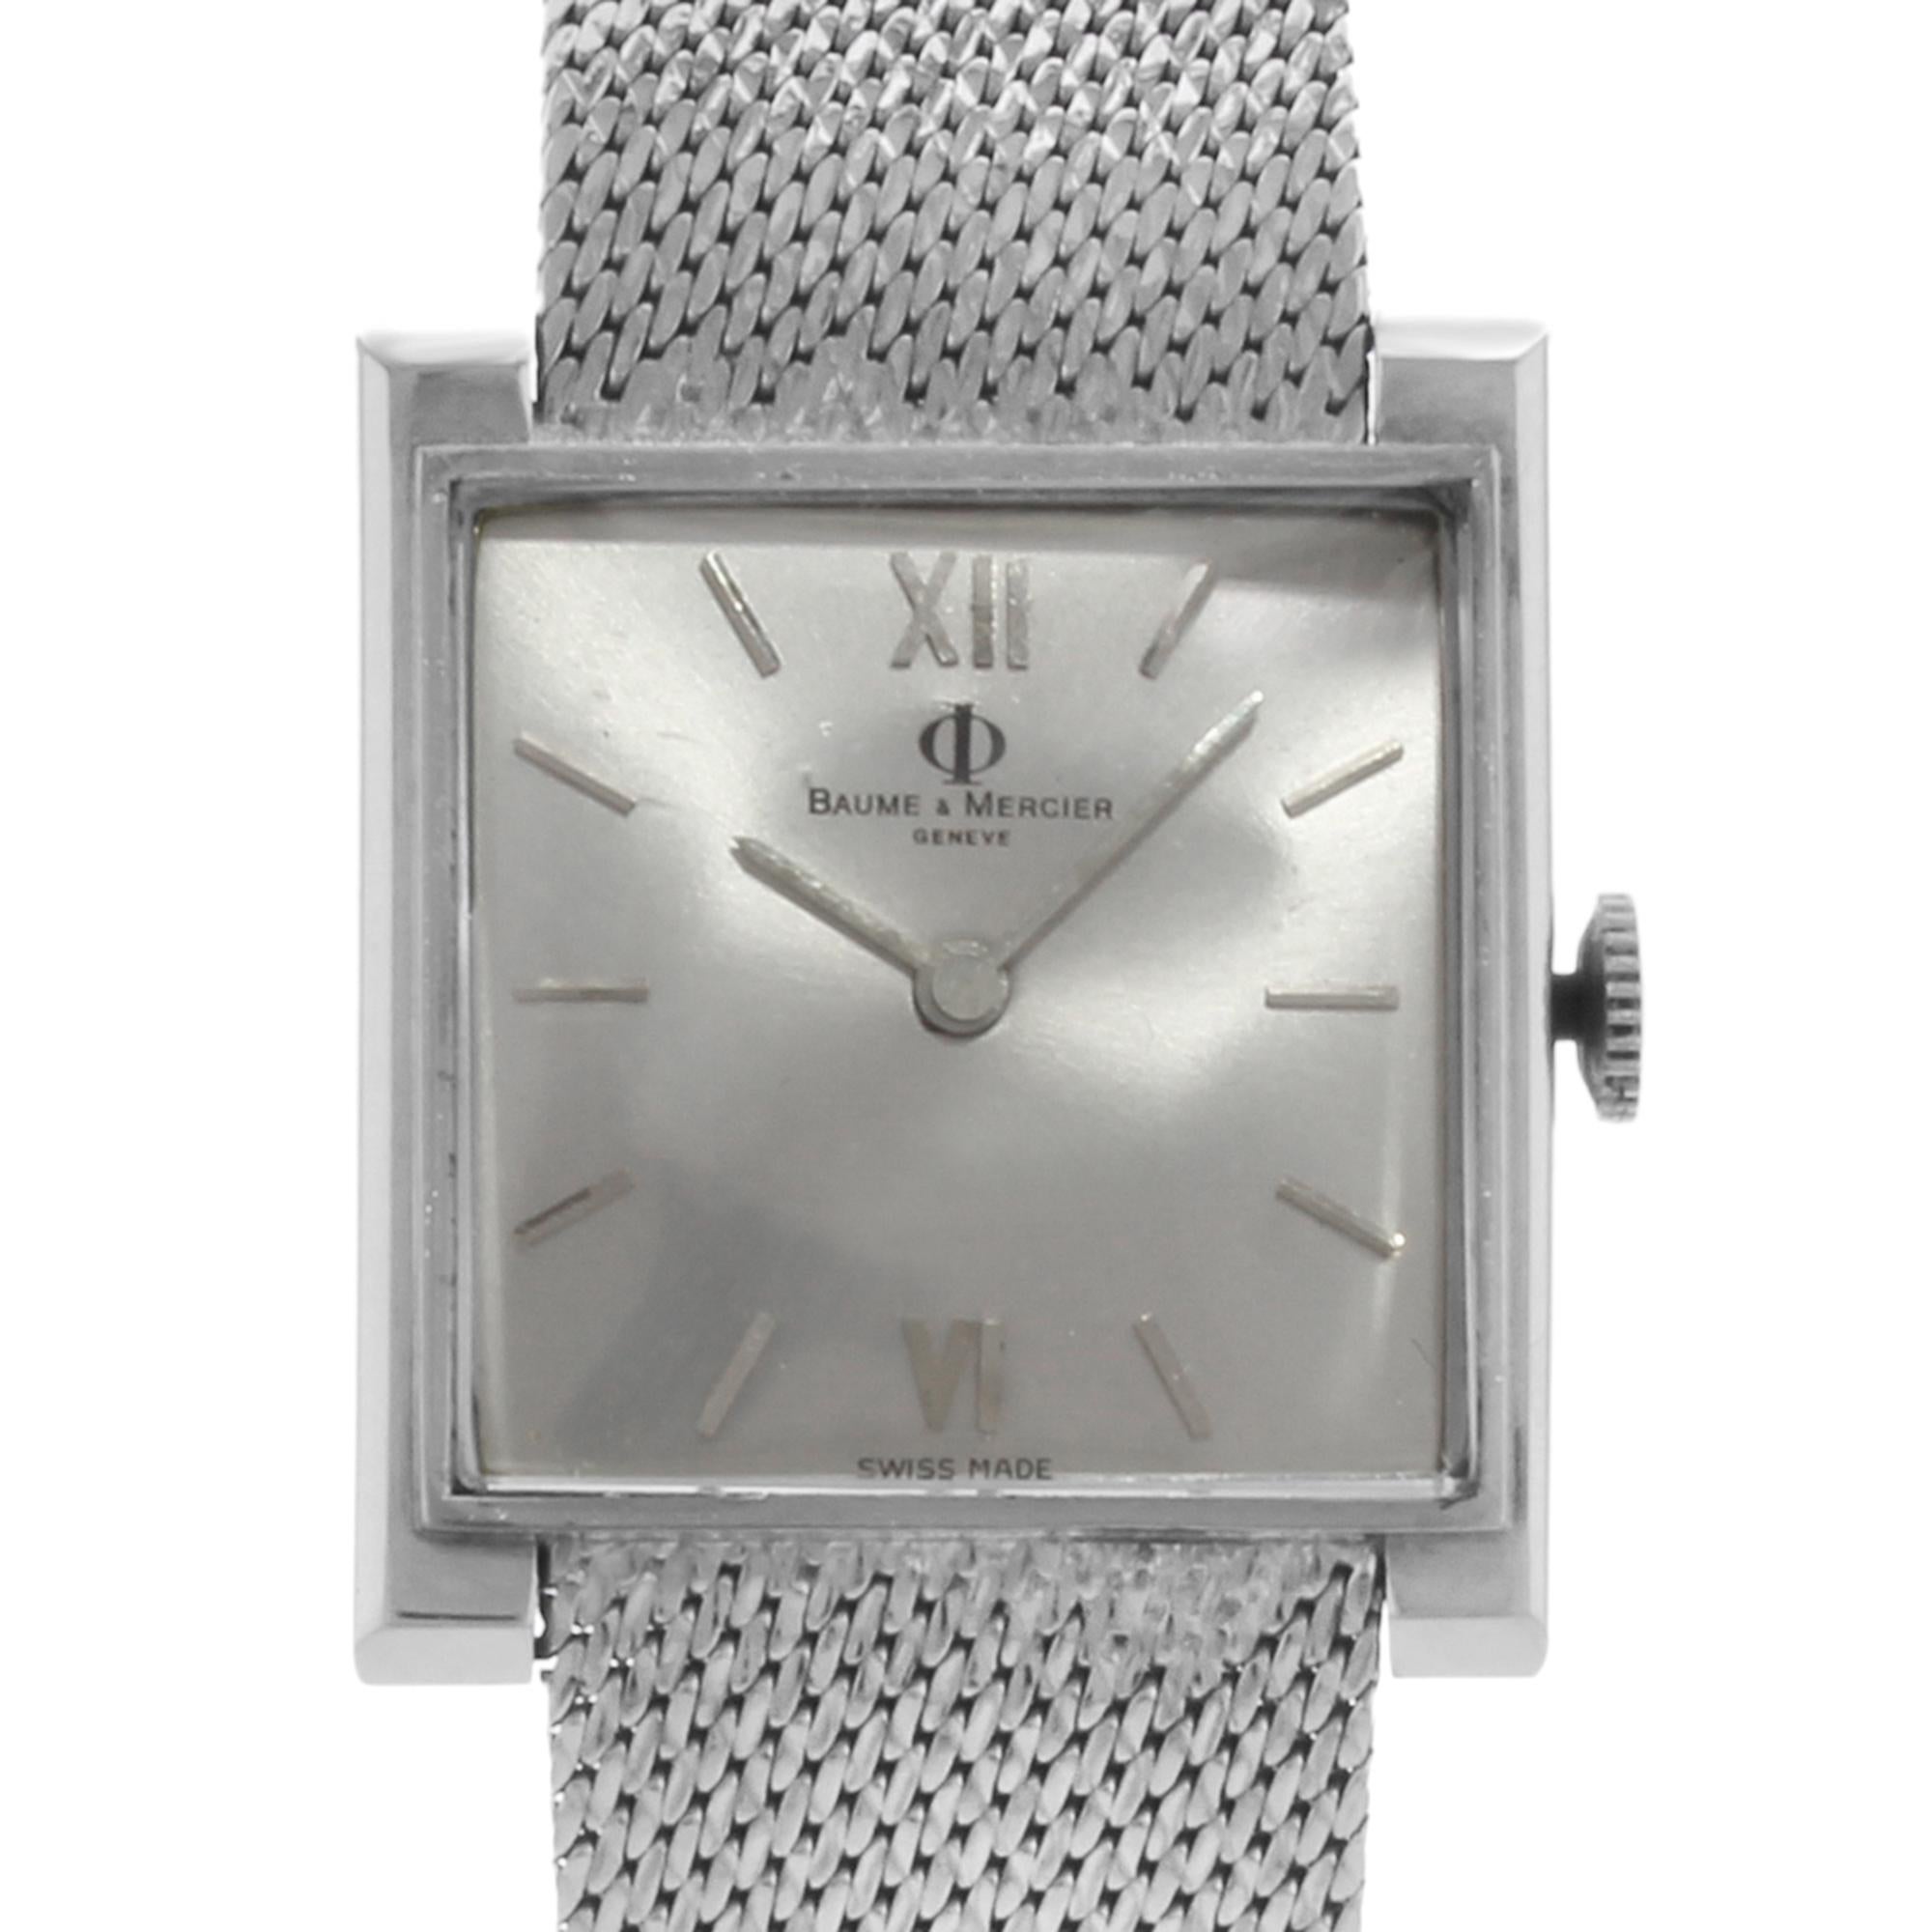 This pre-owned Baume et Mercier Geneve is a beautiful Ladies timepiece that is powered by a mechanical movement which is cased in a stainless steel case. It has a square shape face, no features dial, and has hand sticks style markers. It is